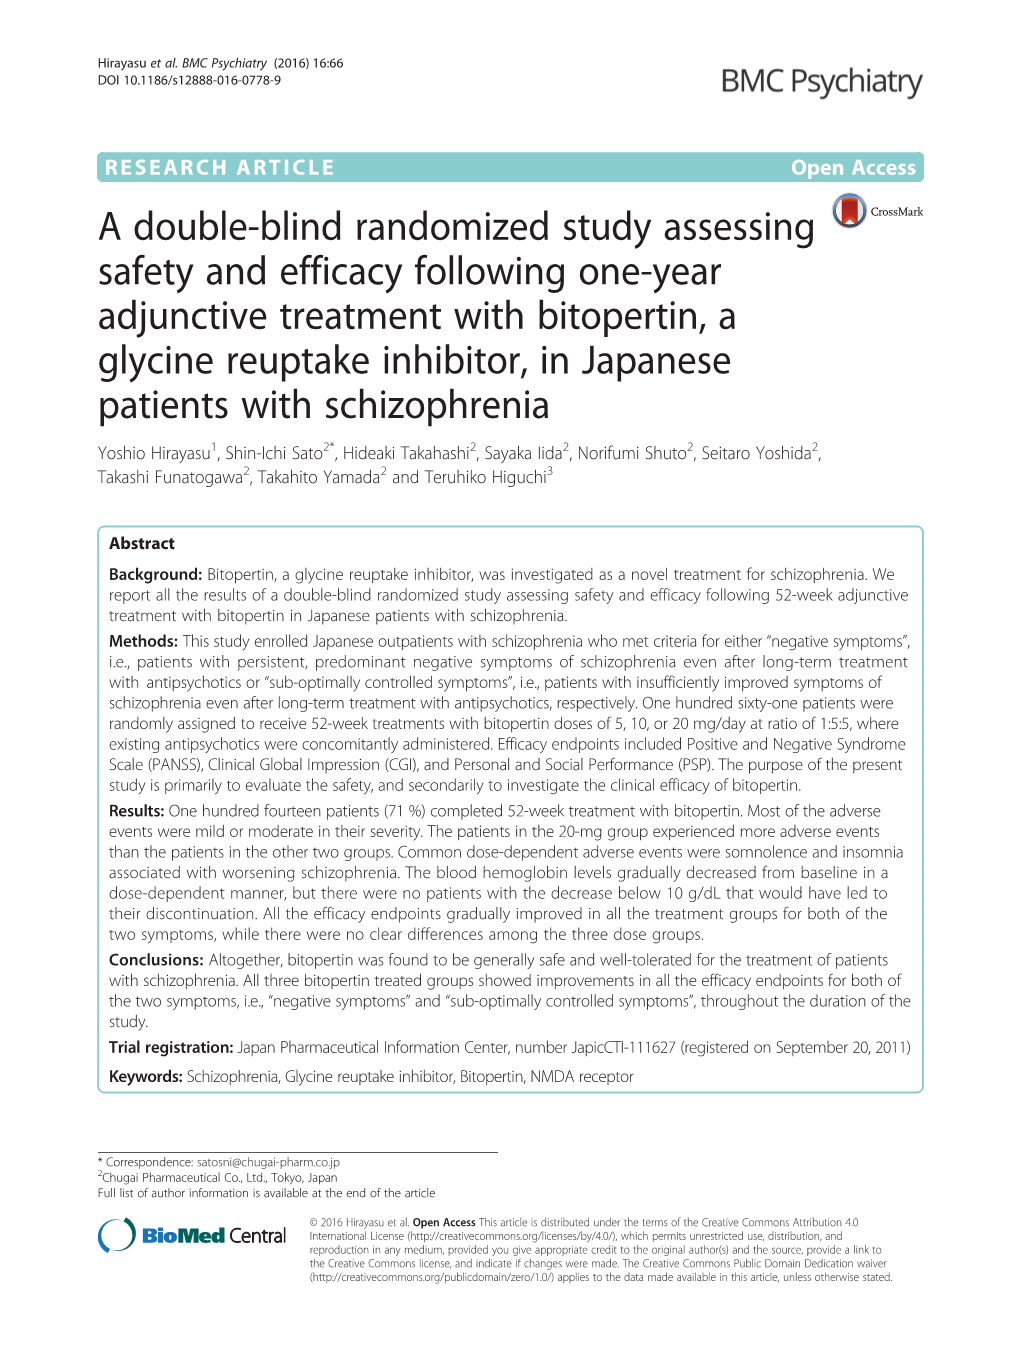 A Double-Blind Randomized Study Assessing Safety and Efficacy